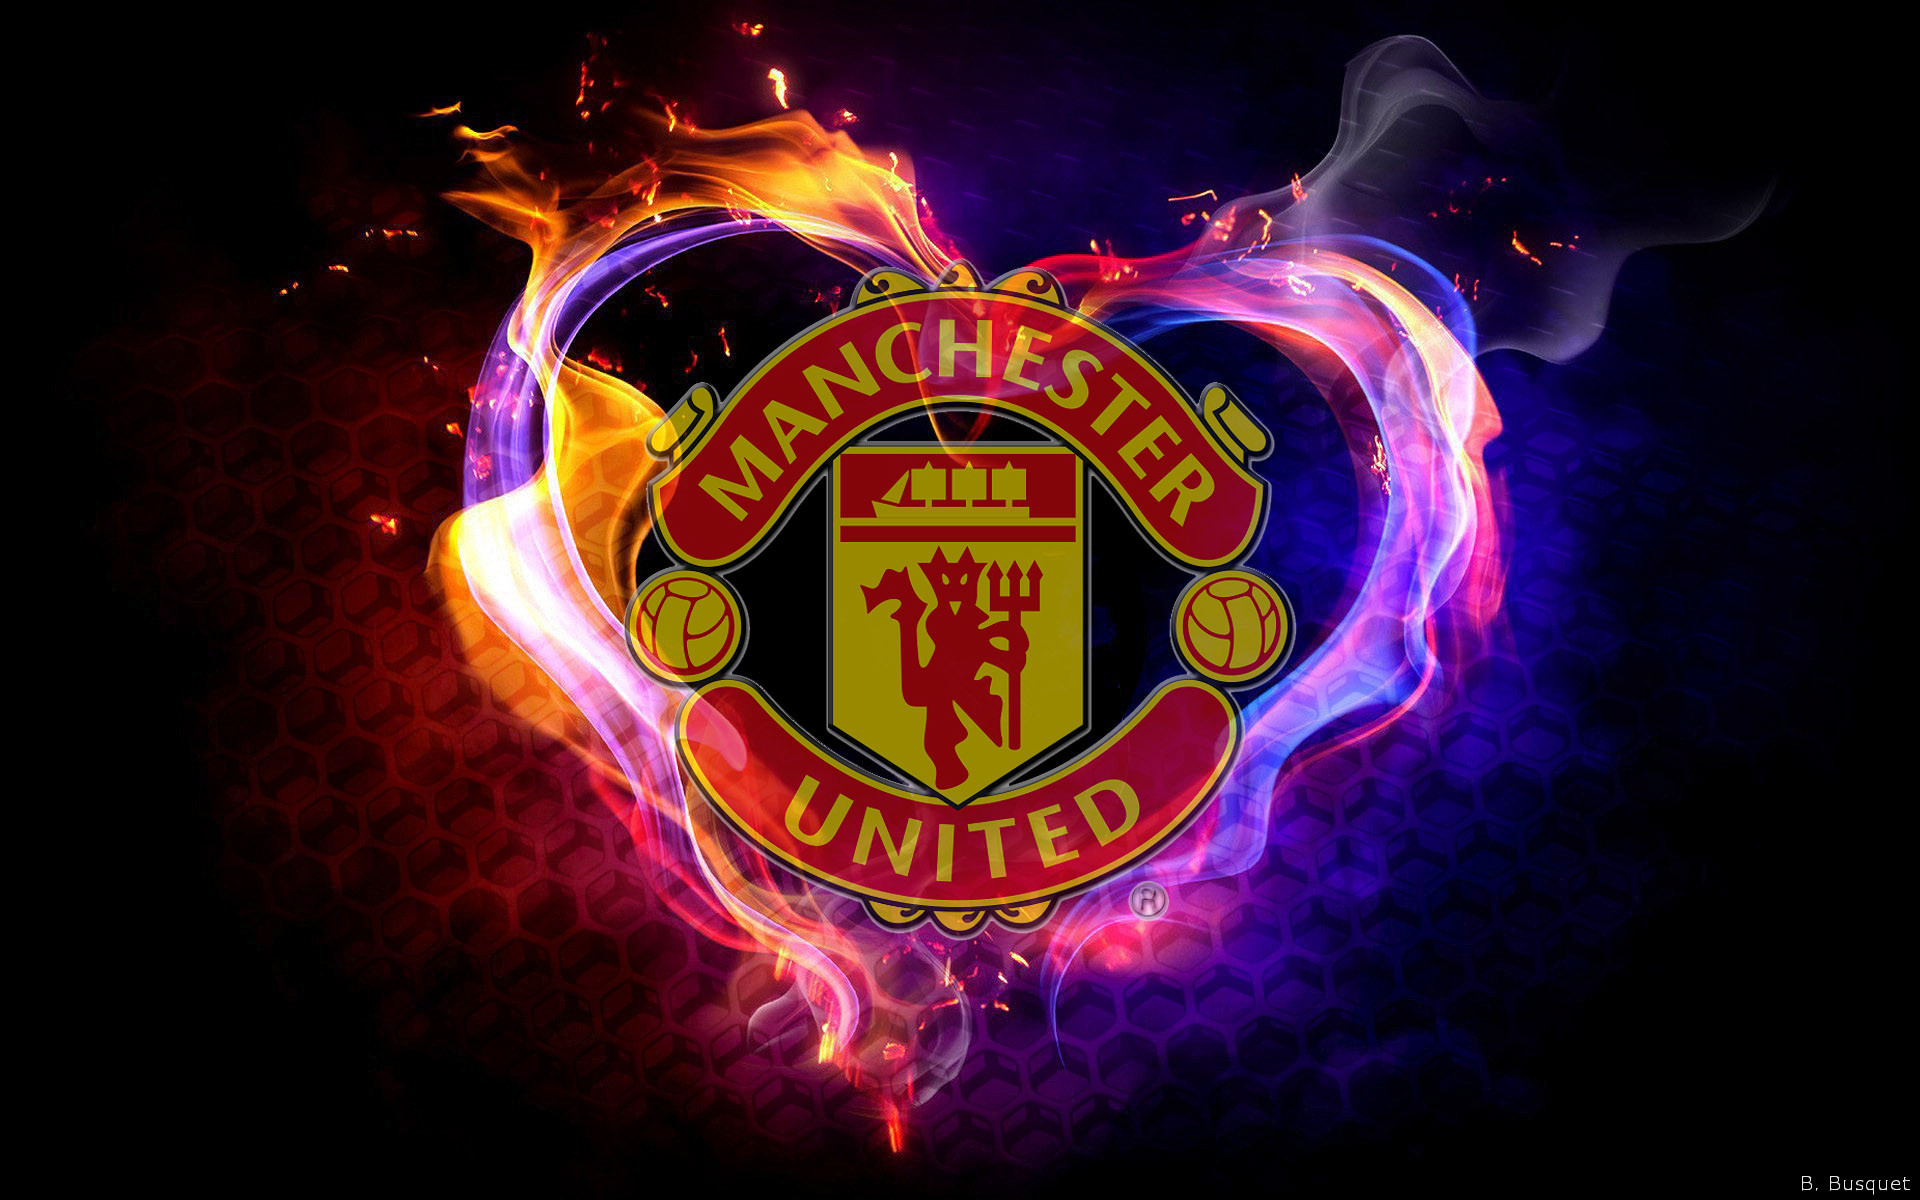 Manchester United Wallpaper With Flames - Manchester United Logo 2019 - HD Wallpaper 